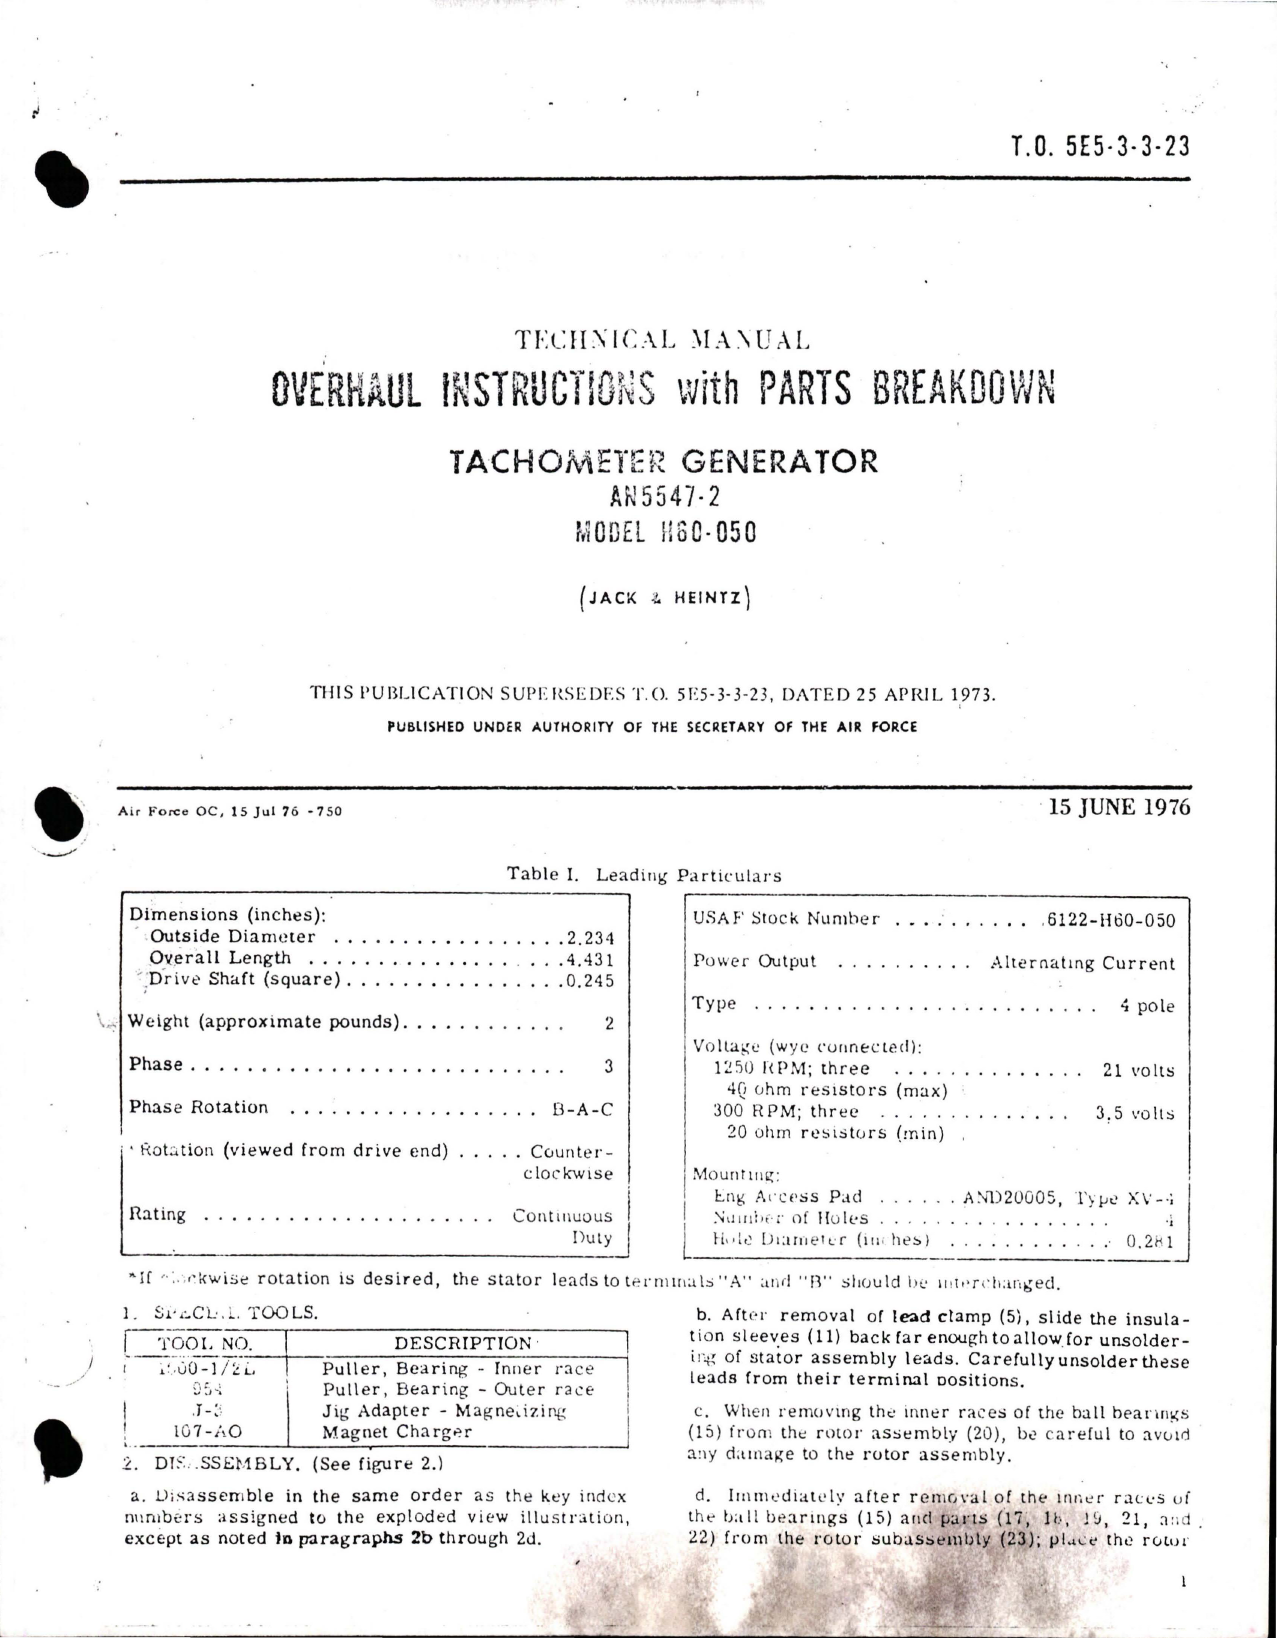 Sample page 1 from AirCorps Library document: Overhaul Instructions with Parts for Tachometer Generator - AN5547-2 - Model H60-050